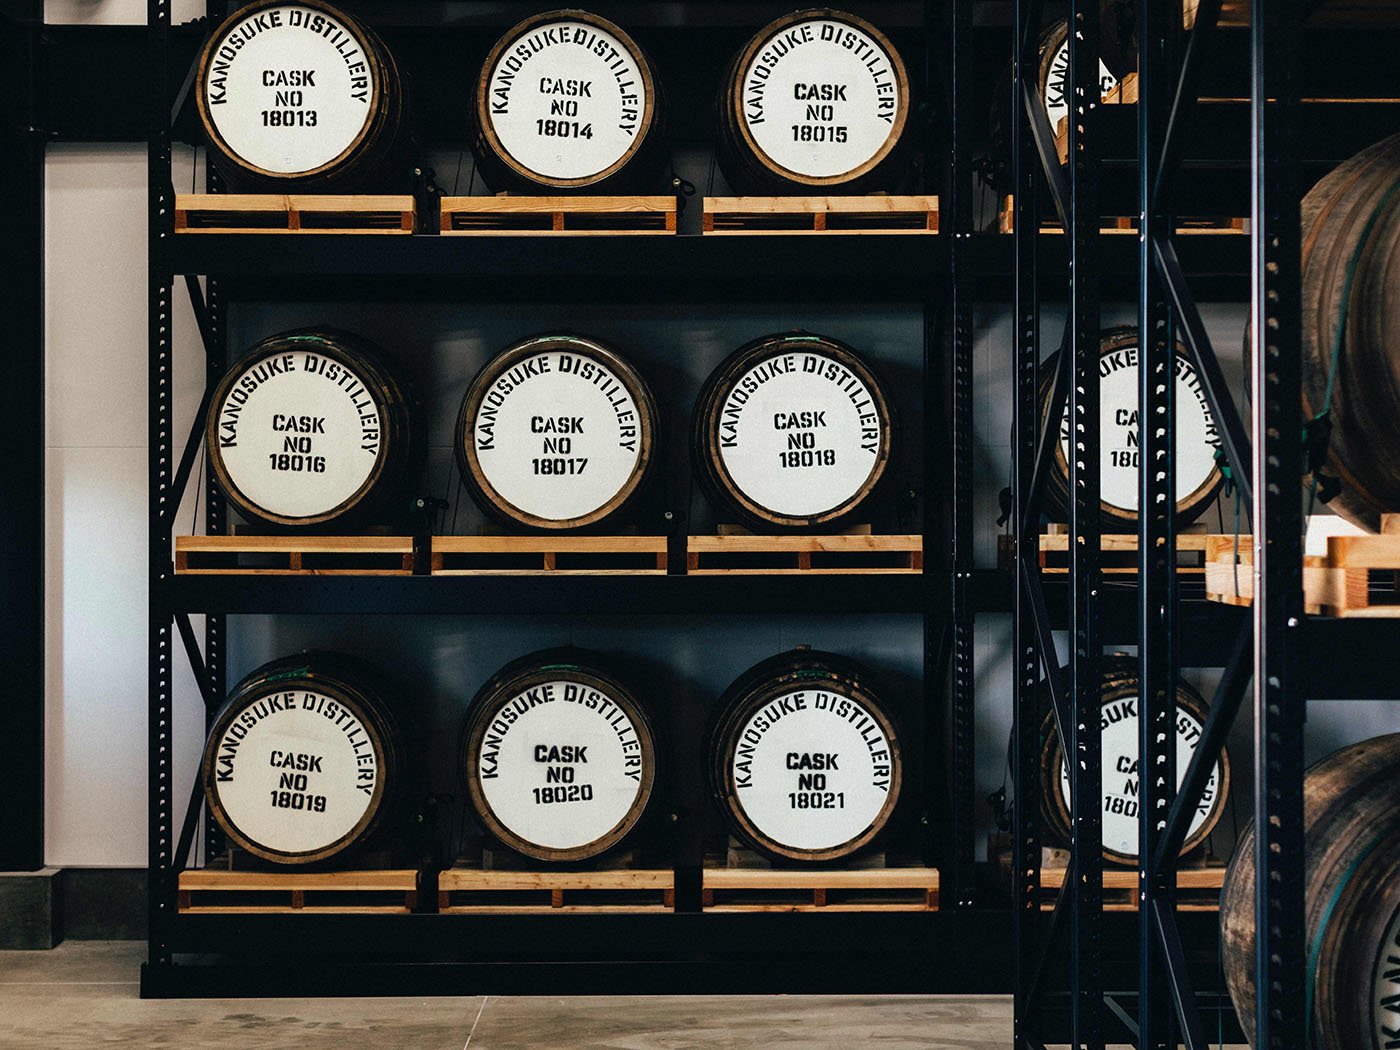 Some of the Casks